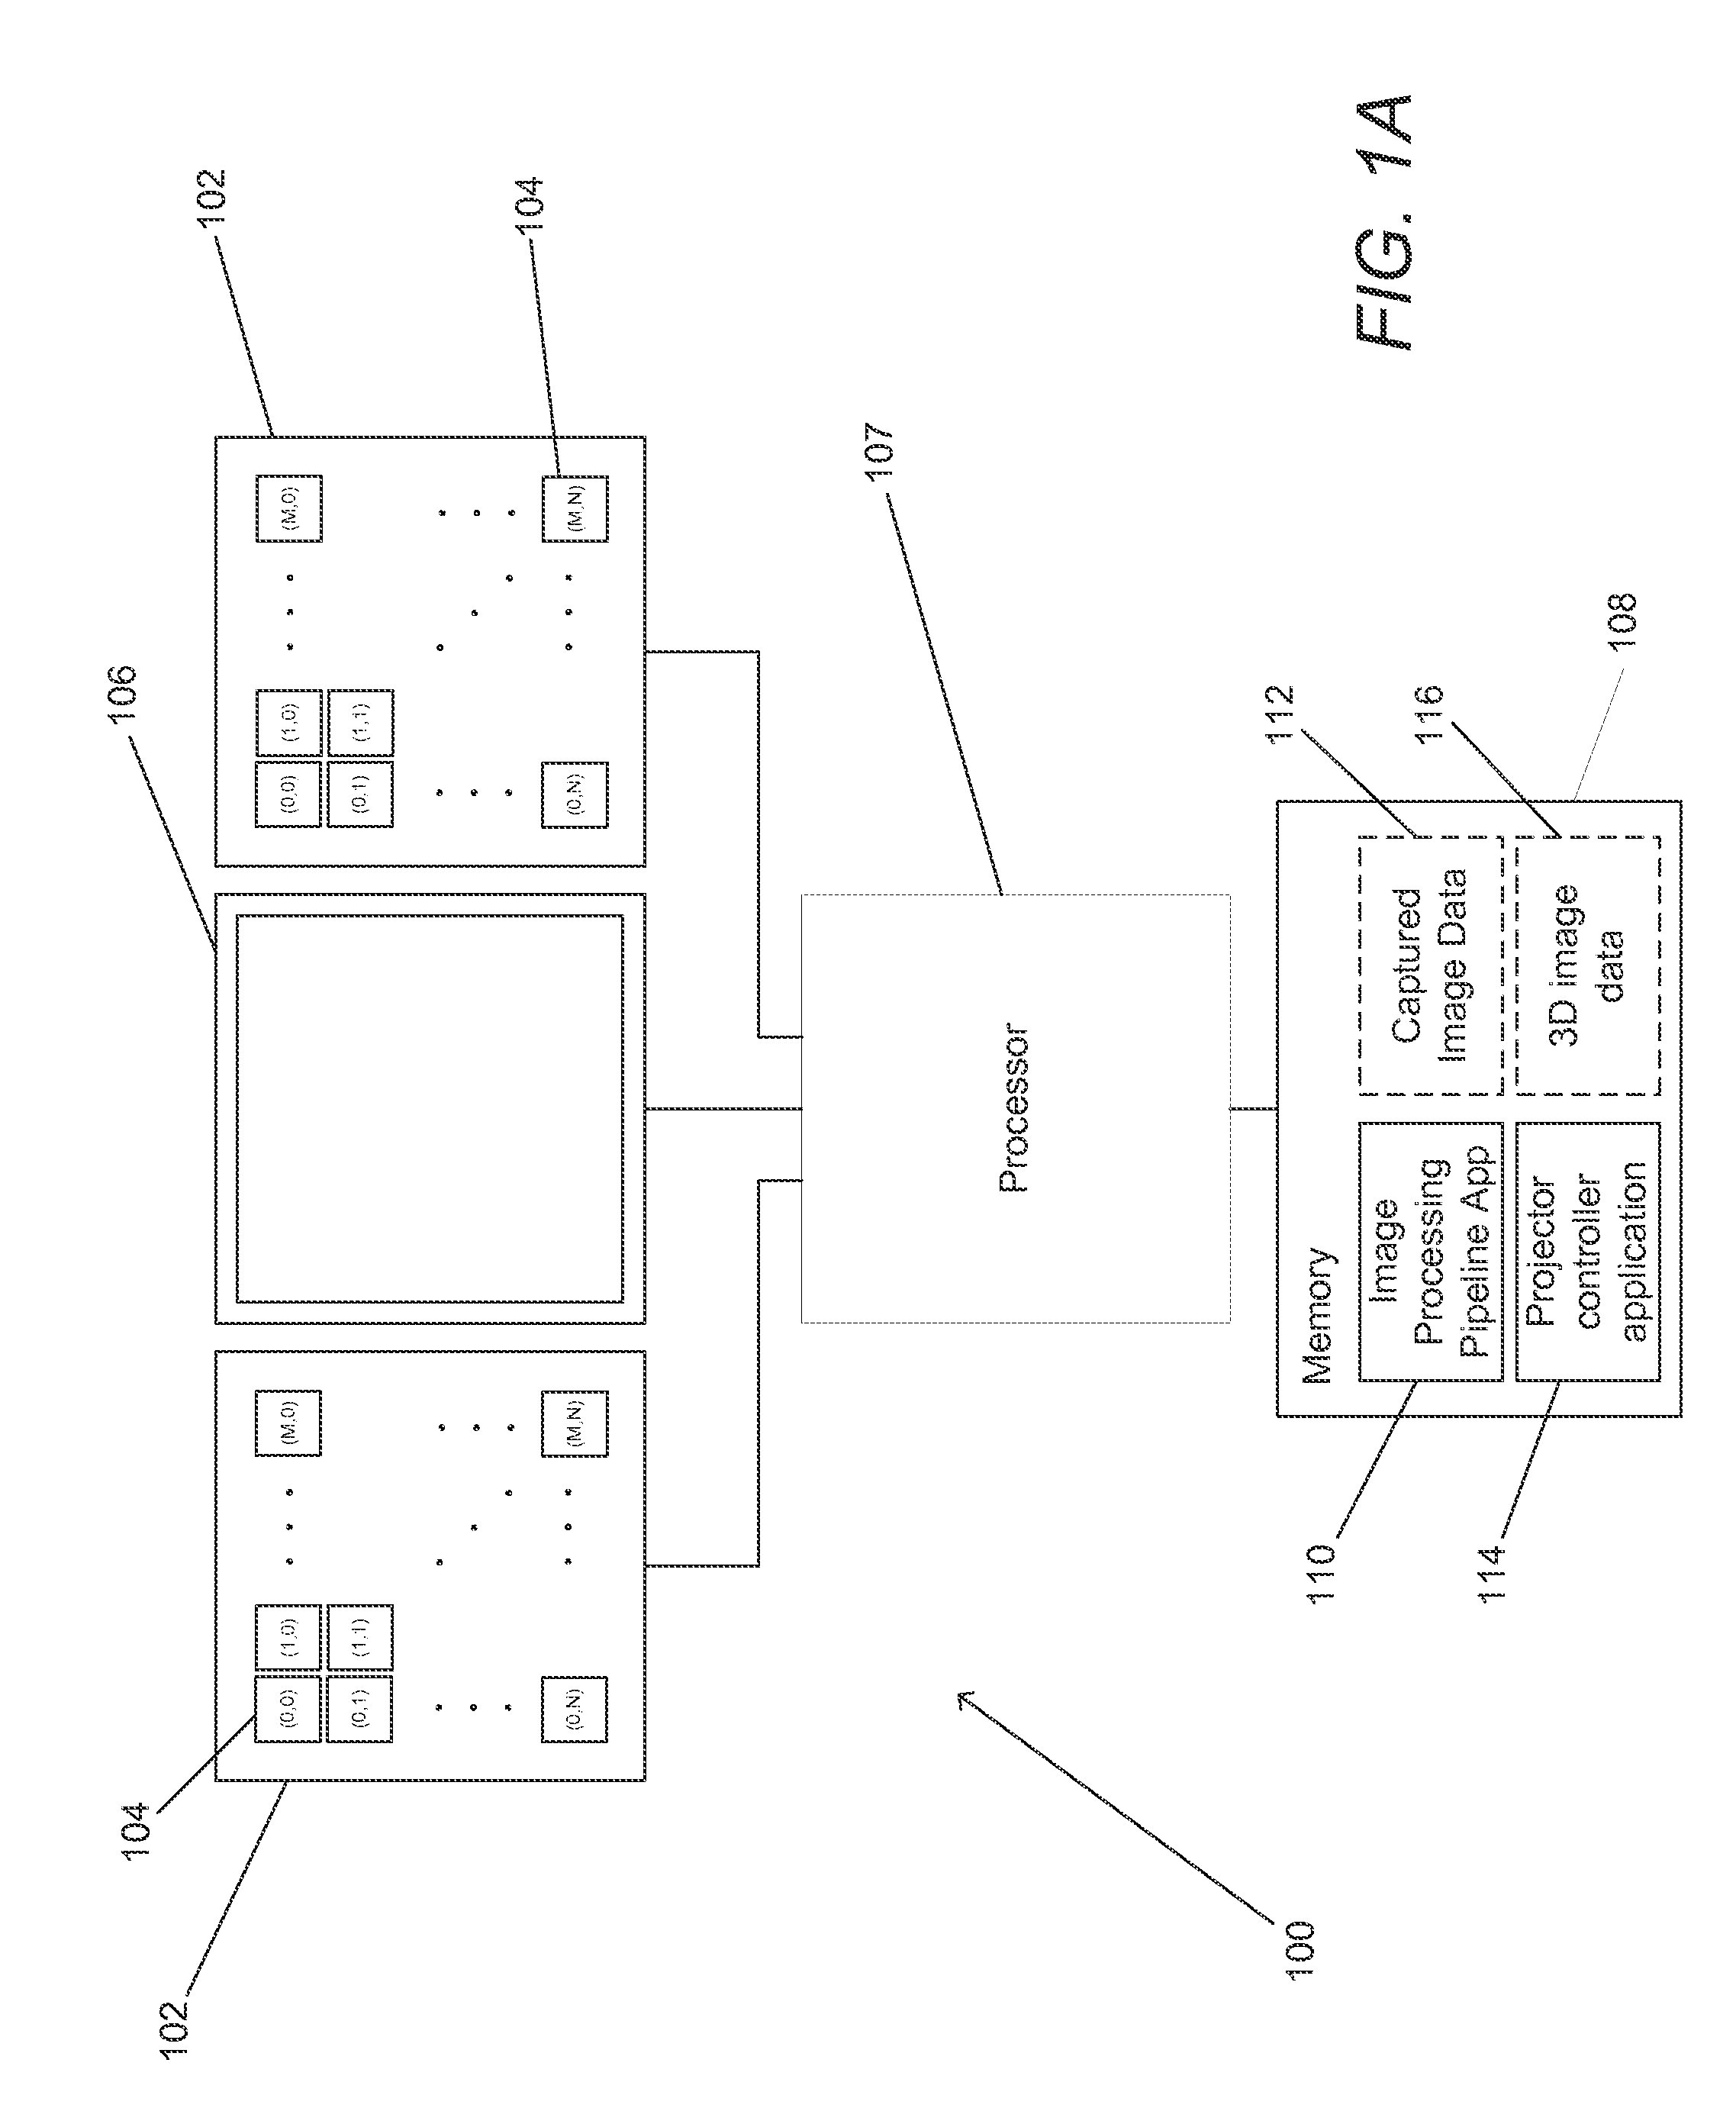 Systems and Methods for Estimating Depth from Projected Texture using Camera Arrays